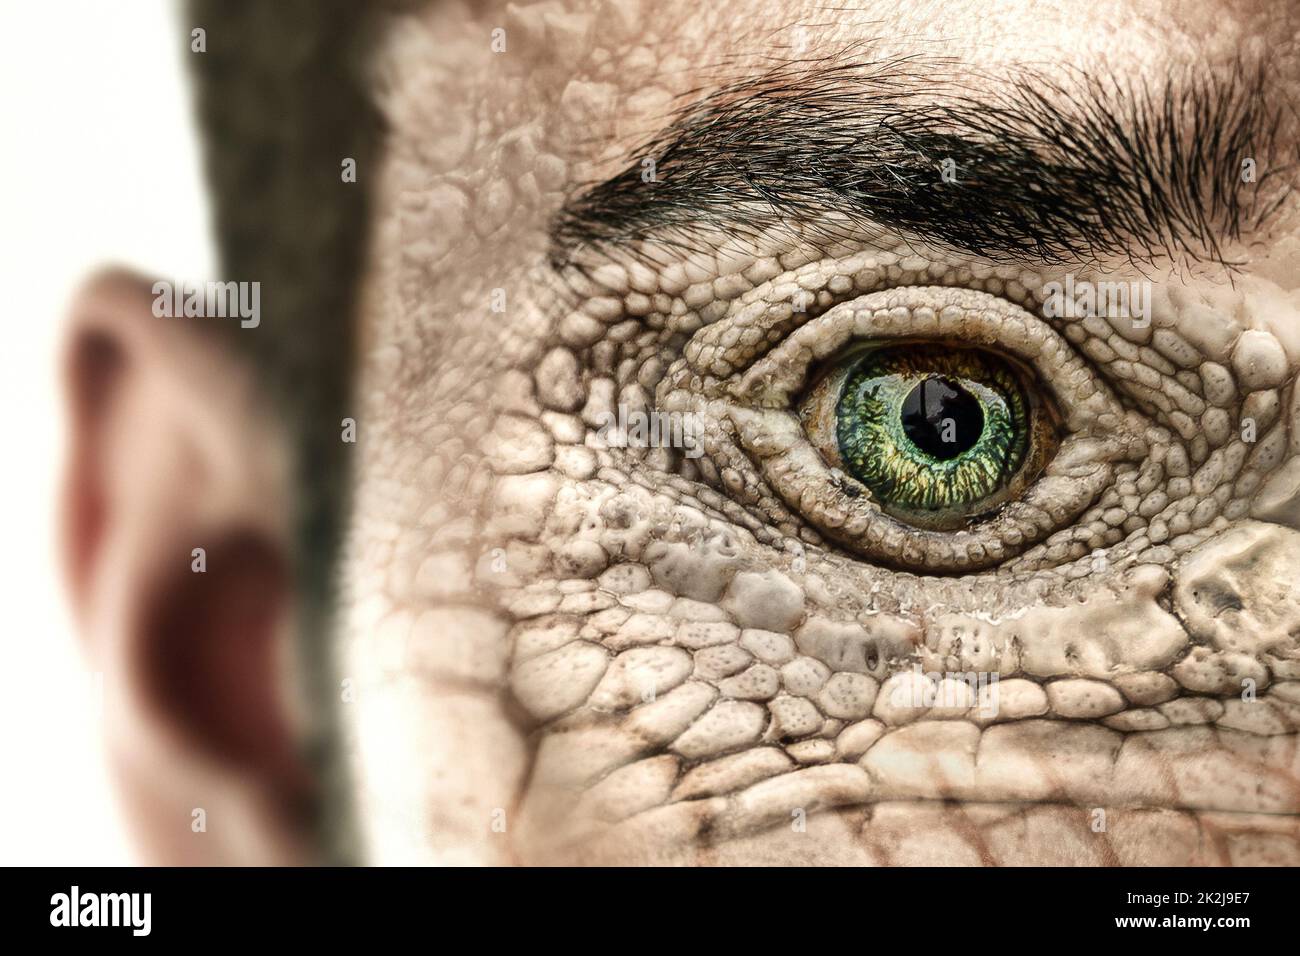 Reptiloid as science fiction character or reptilian conspiracy theory concept. Stock Photo